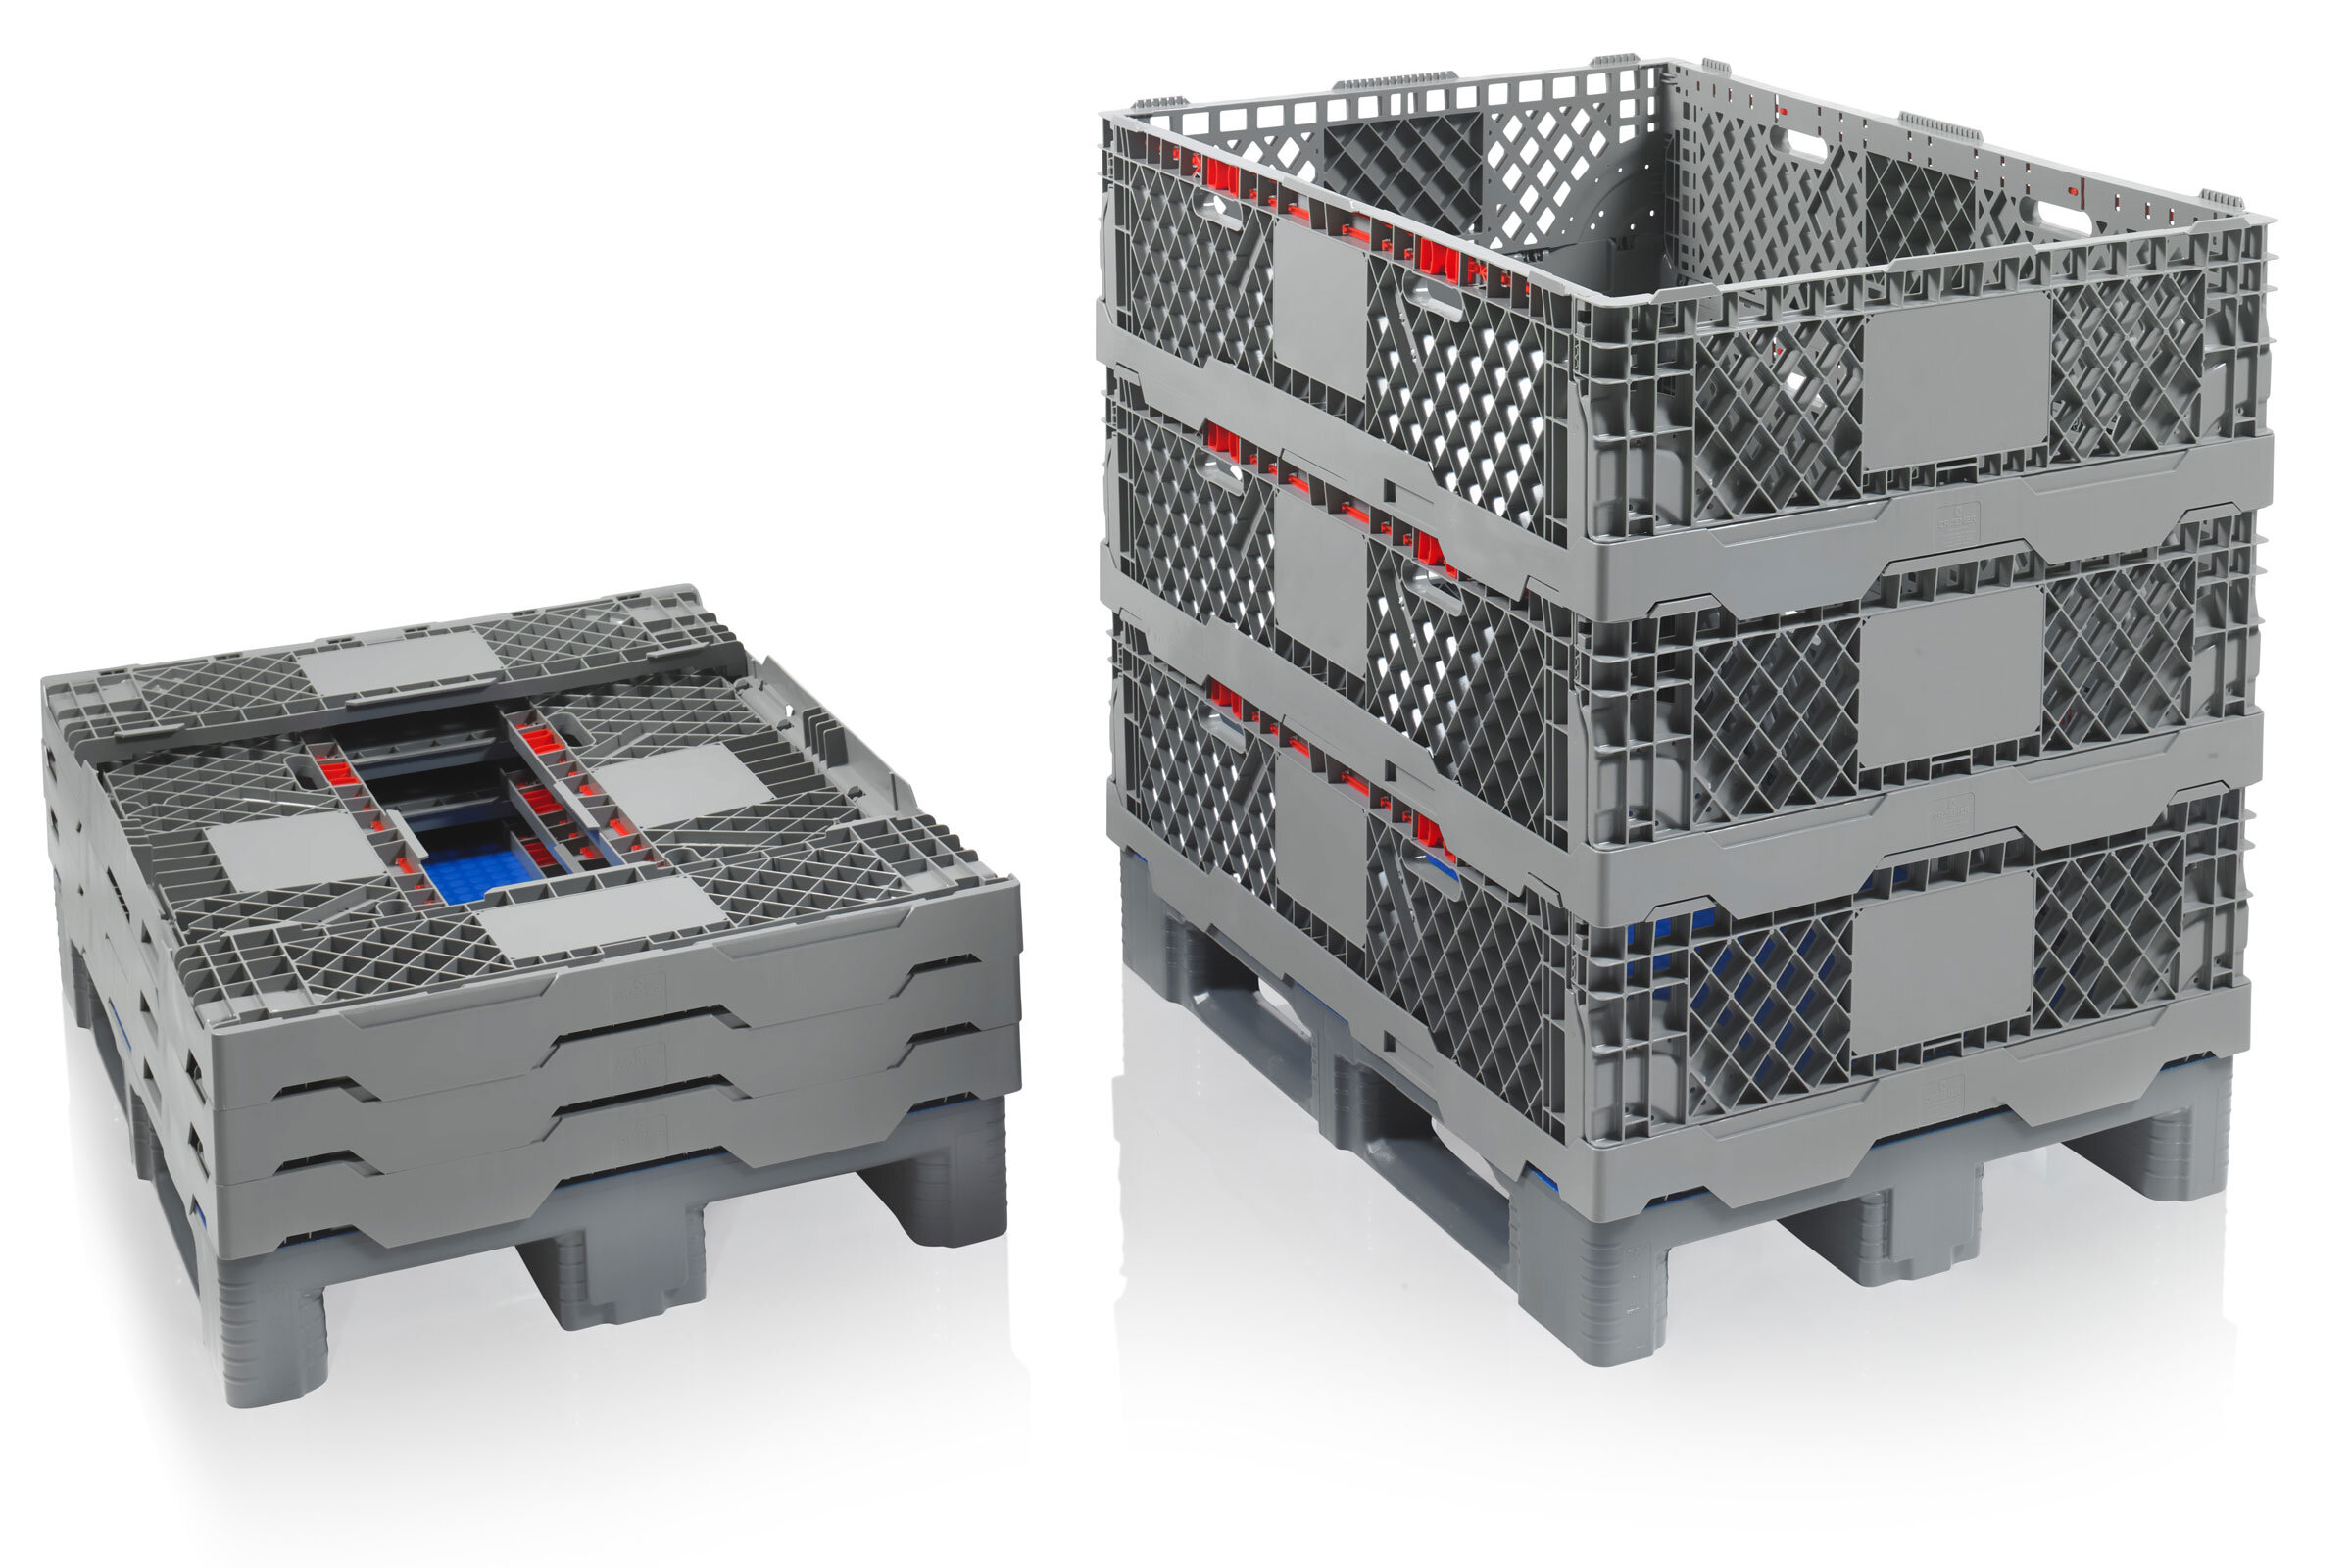 Added Value For Logistics: The Euro Pallet Collar CC1 From Craemer